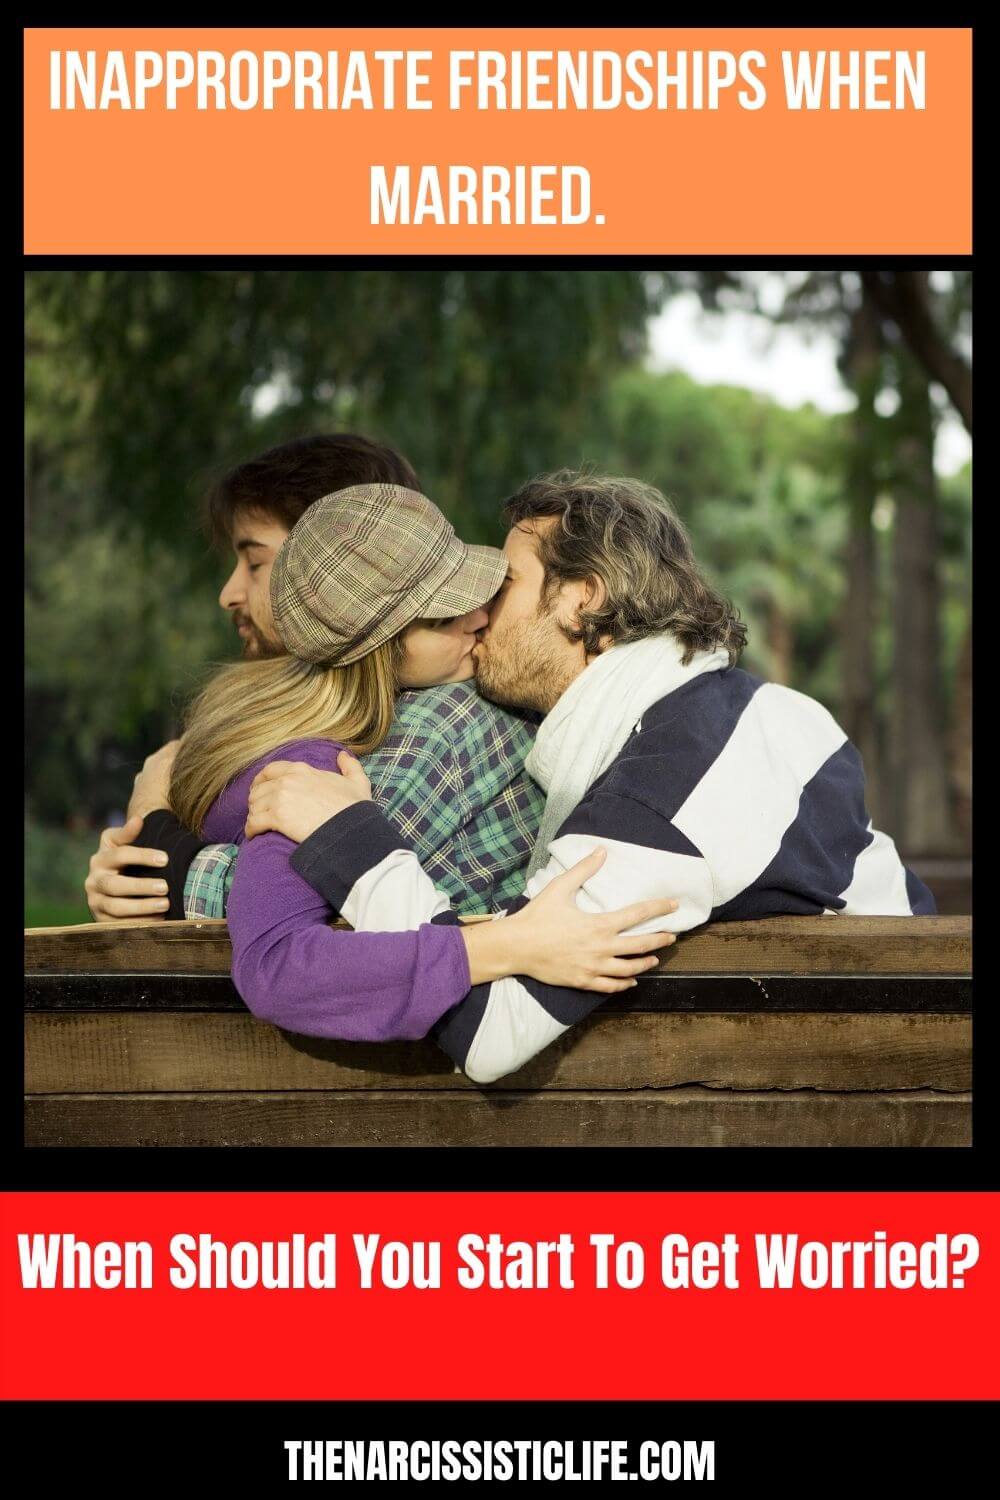 Inappropriate Friendships When Married Should You Be Worried? photo image